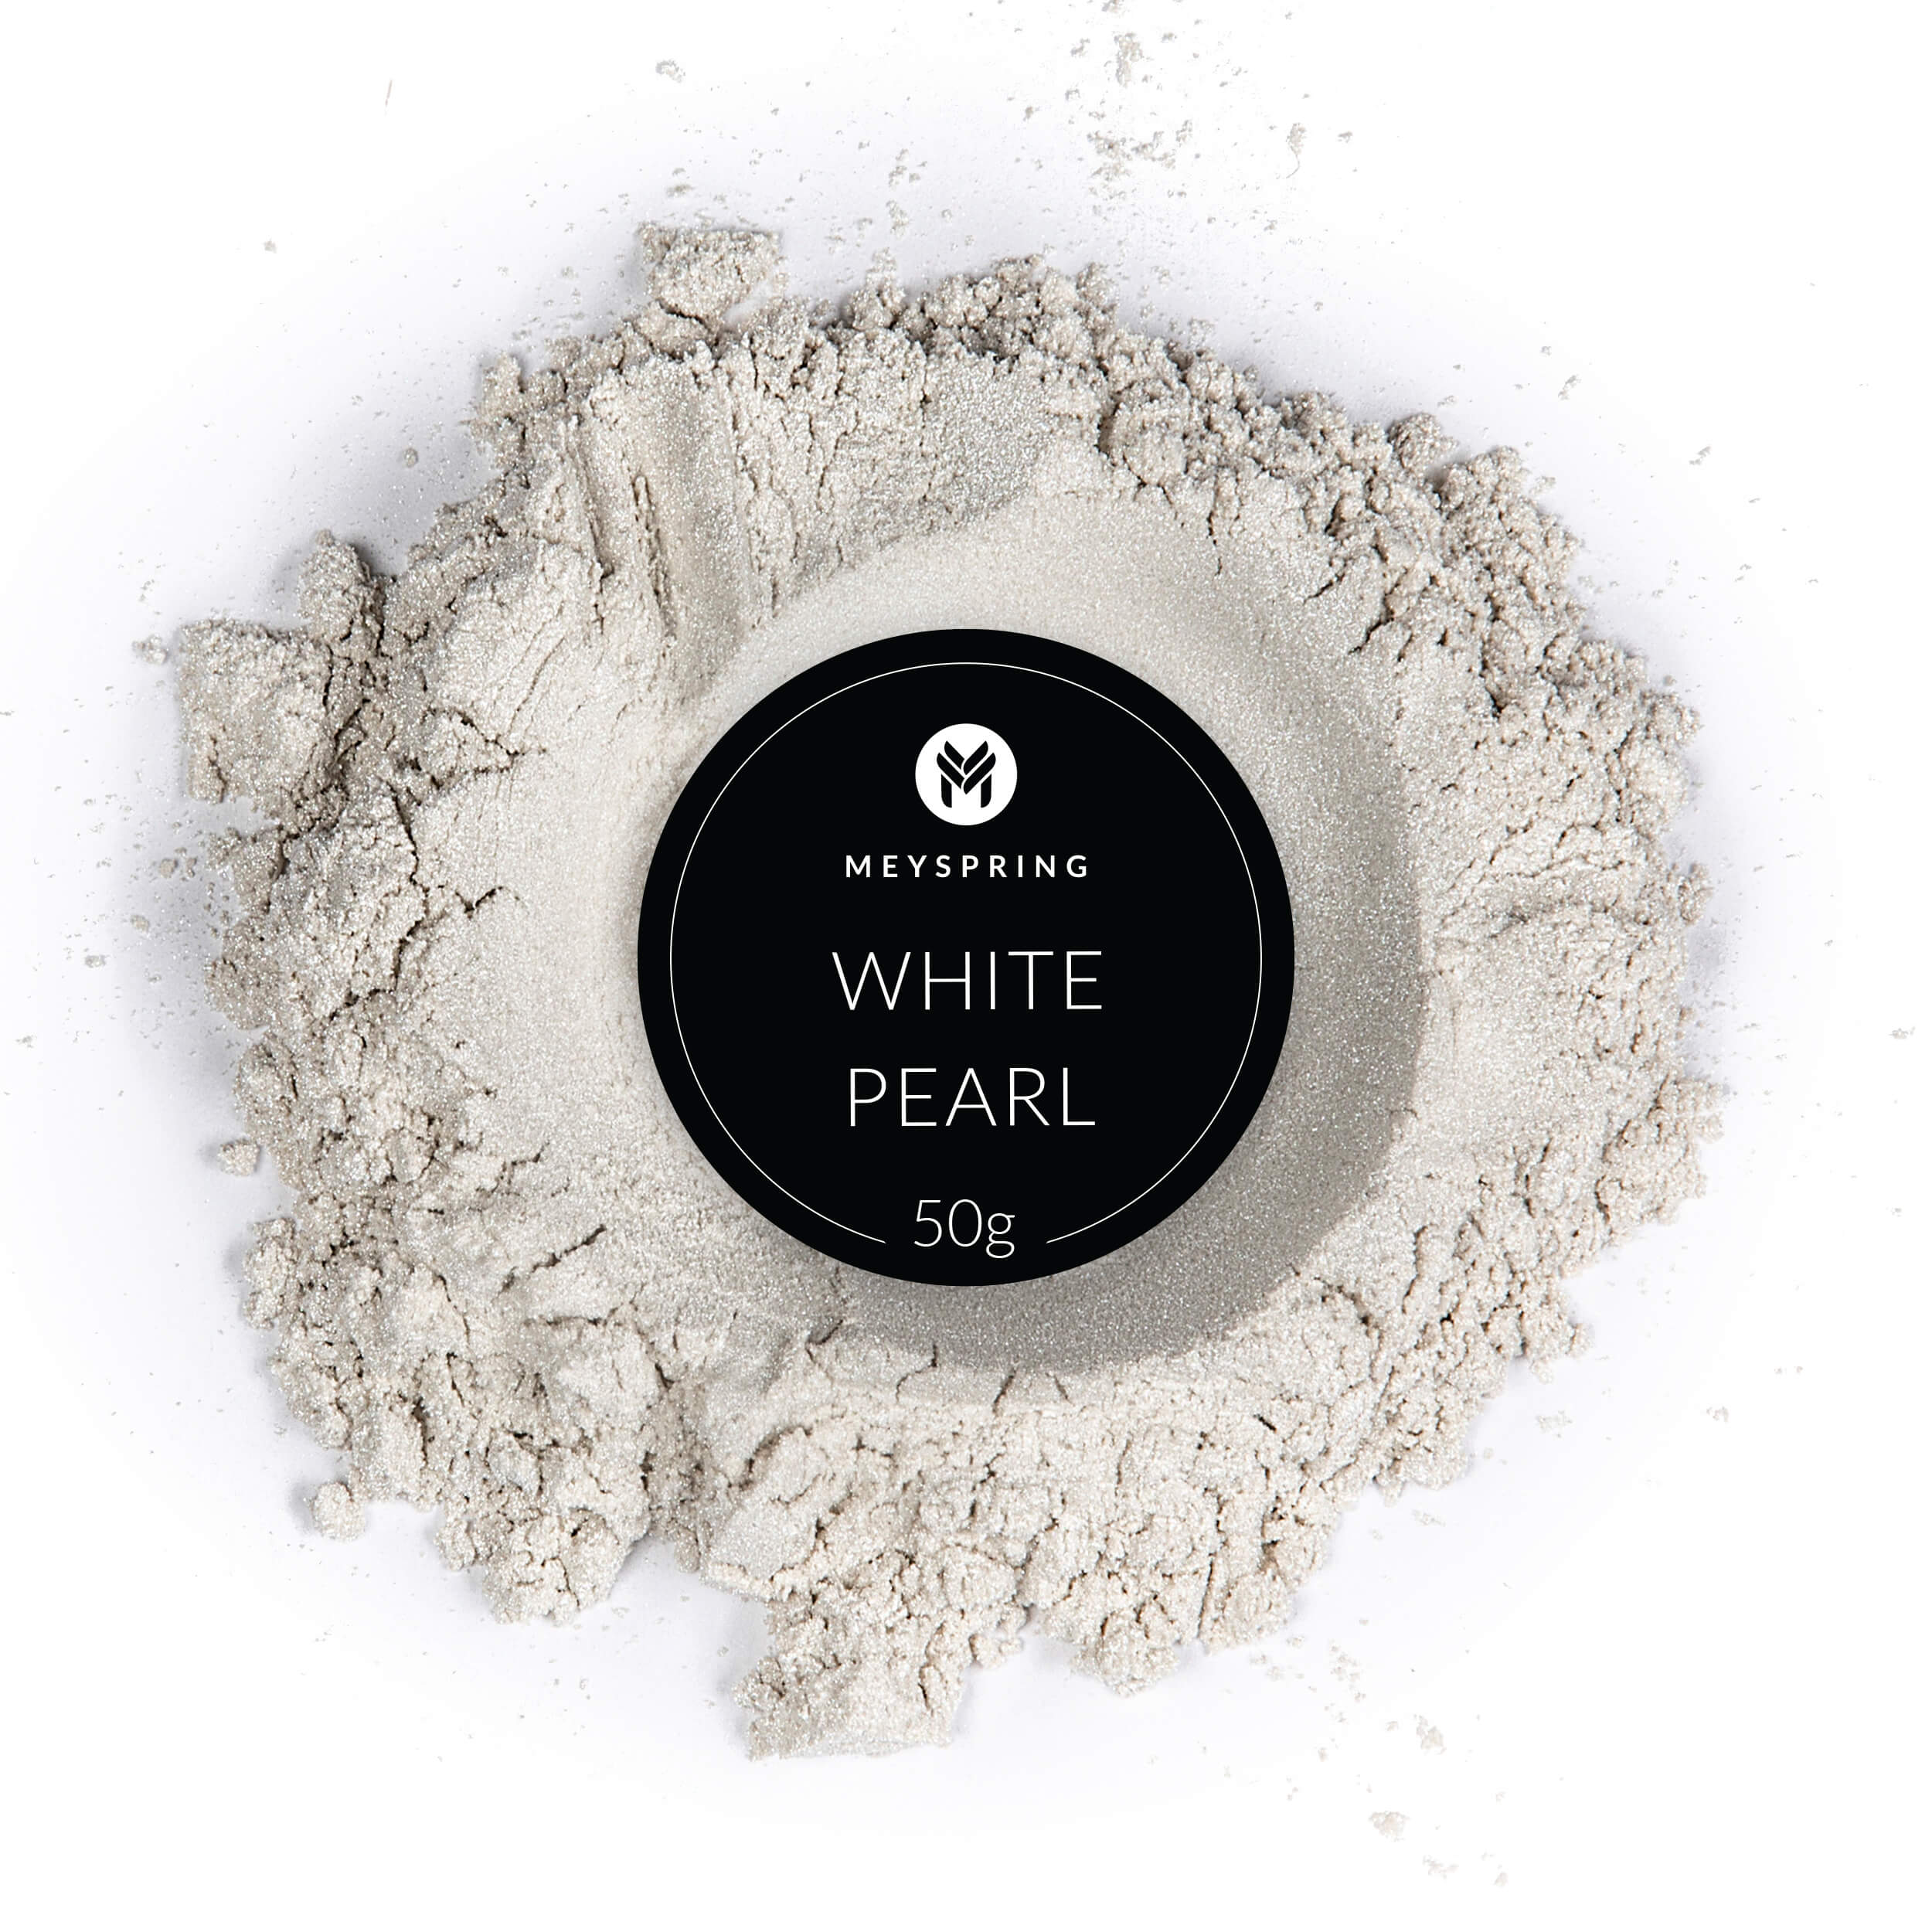 White Pearl Epoxy Resin Color Pigment - Mica Powder 50g by